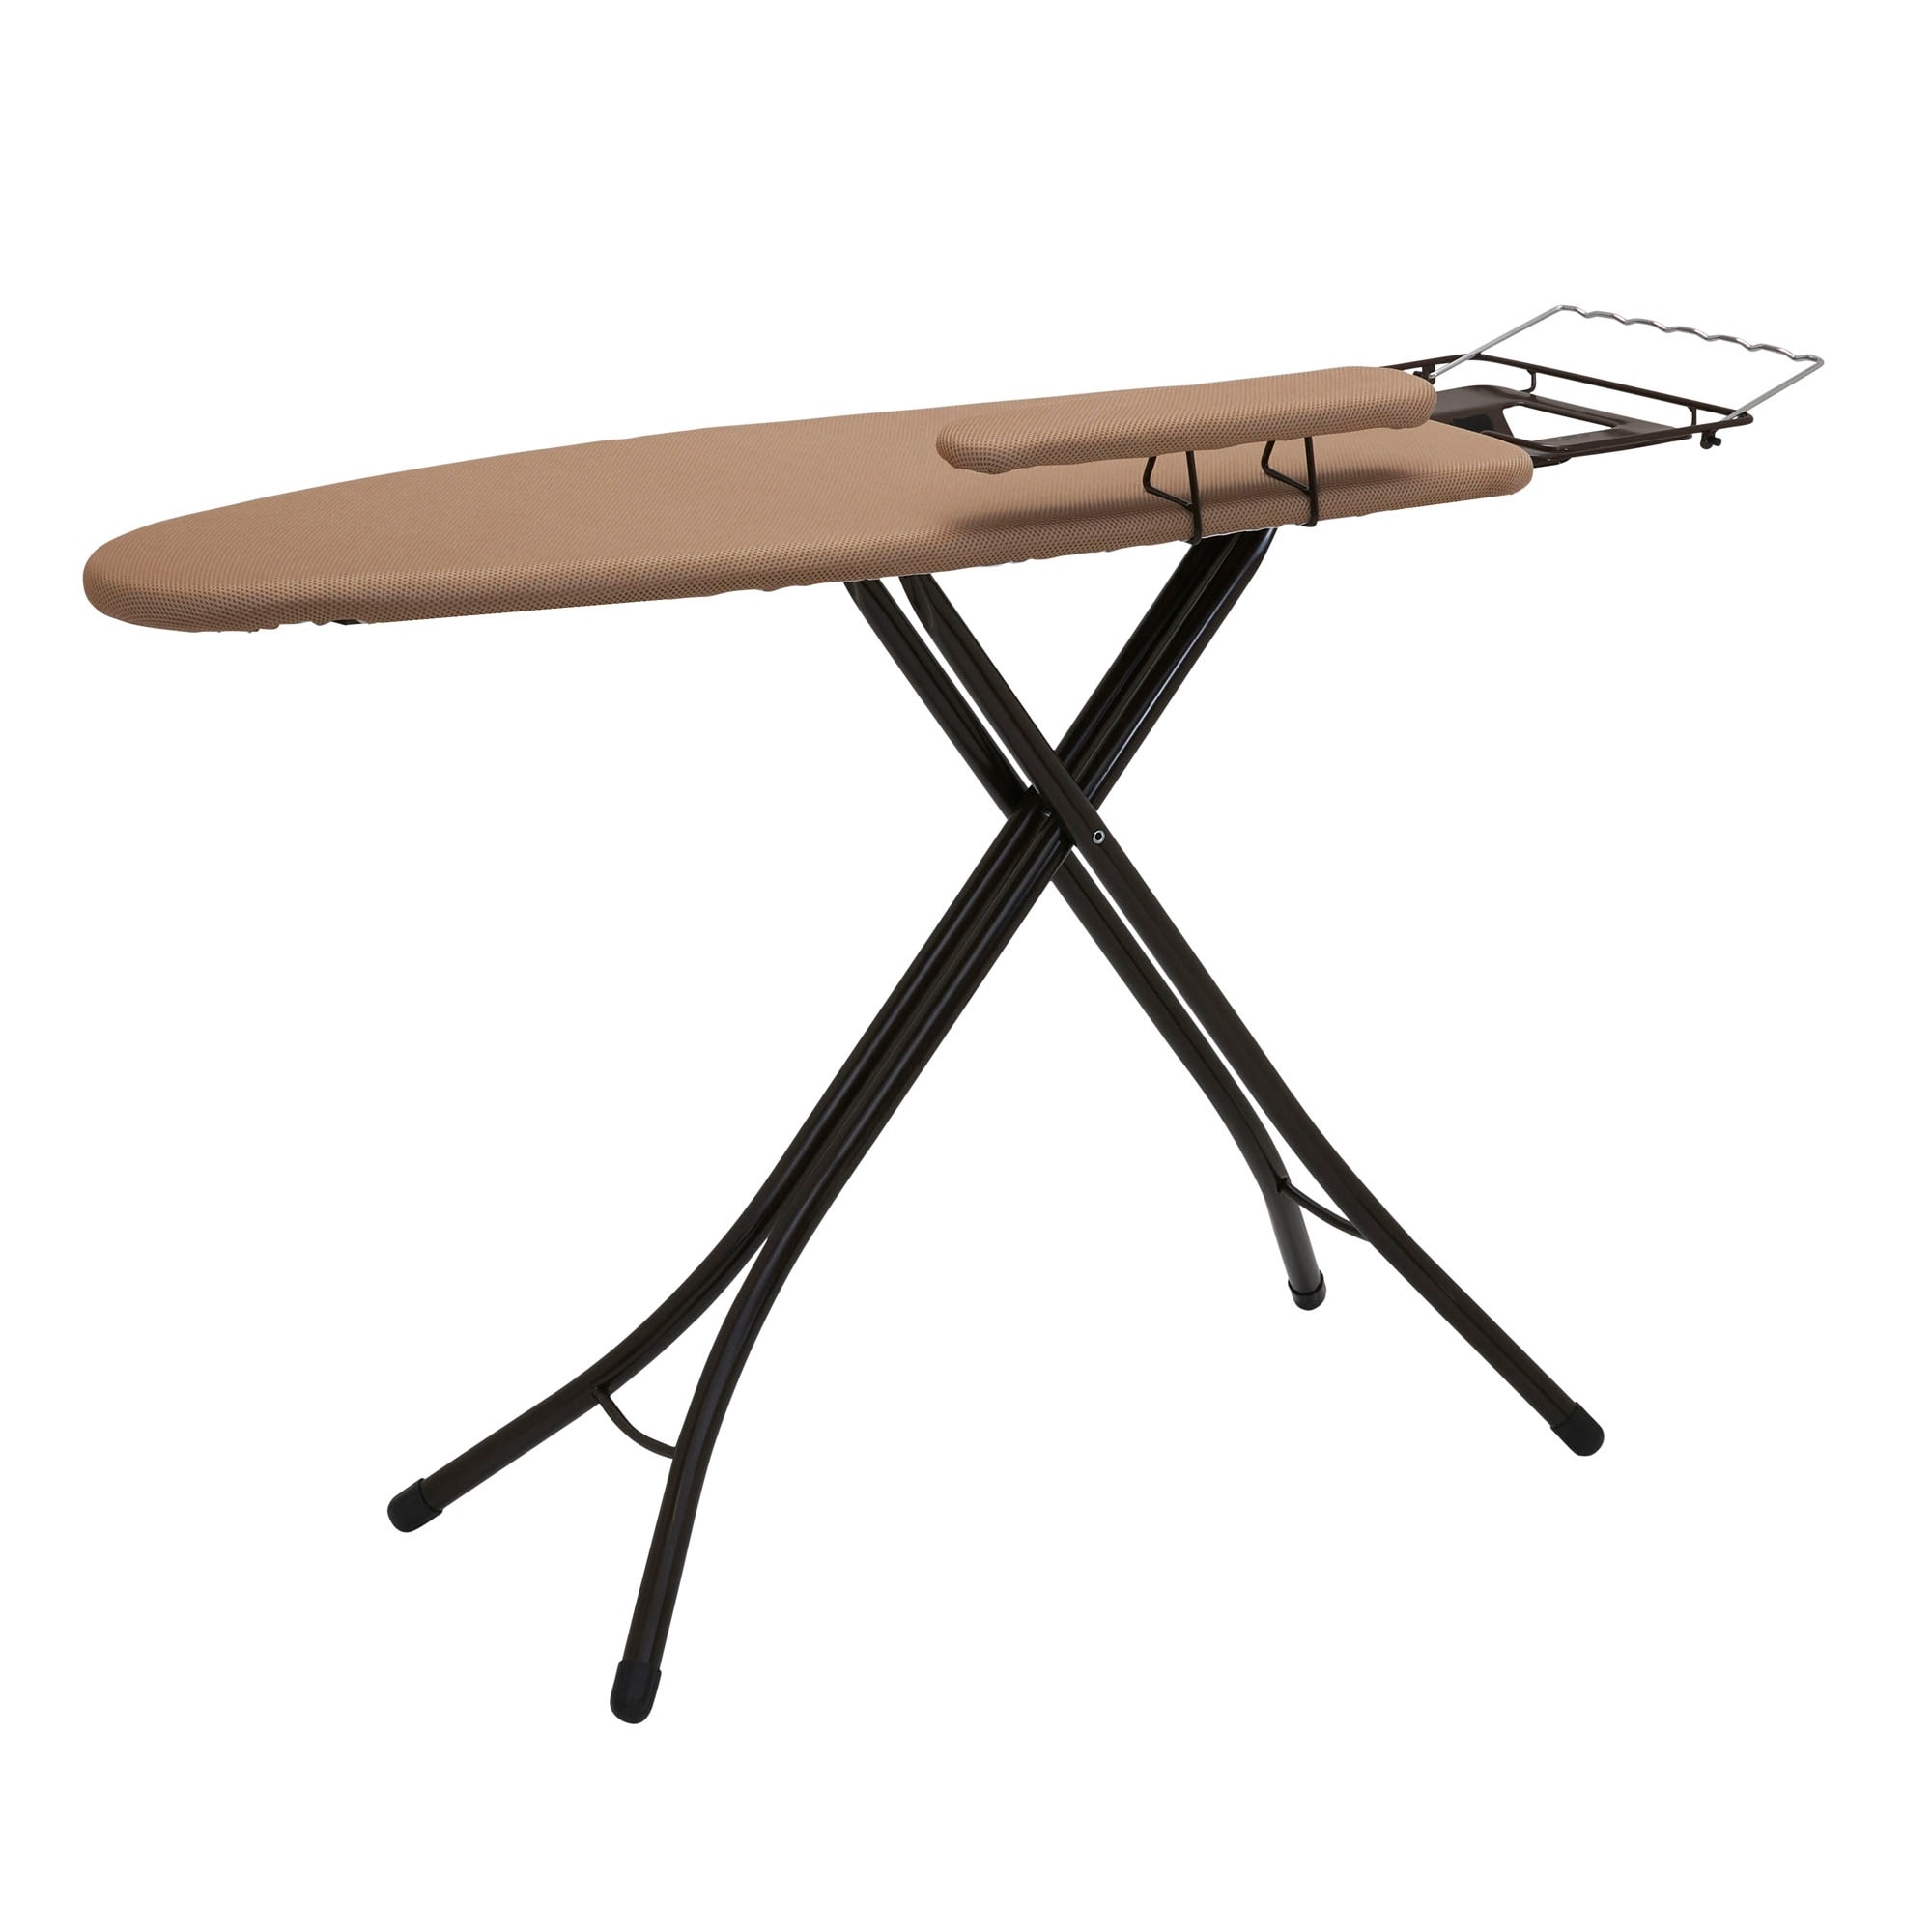 4-Leg Ironing Station with Sleeve Board and Iron Rest Hanger Bar - 49.0L x  18.0W x 38.0H - Bed Bath & Beyond - 30707374